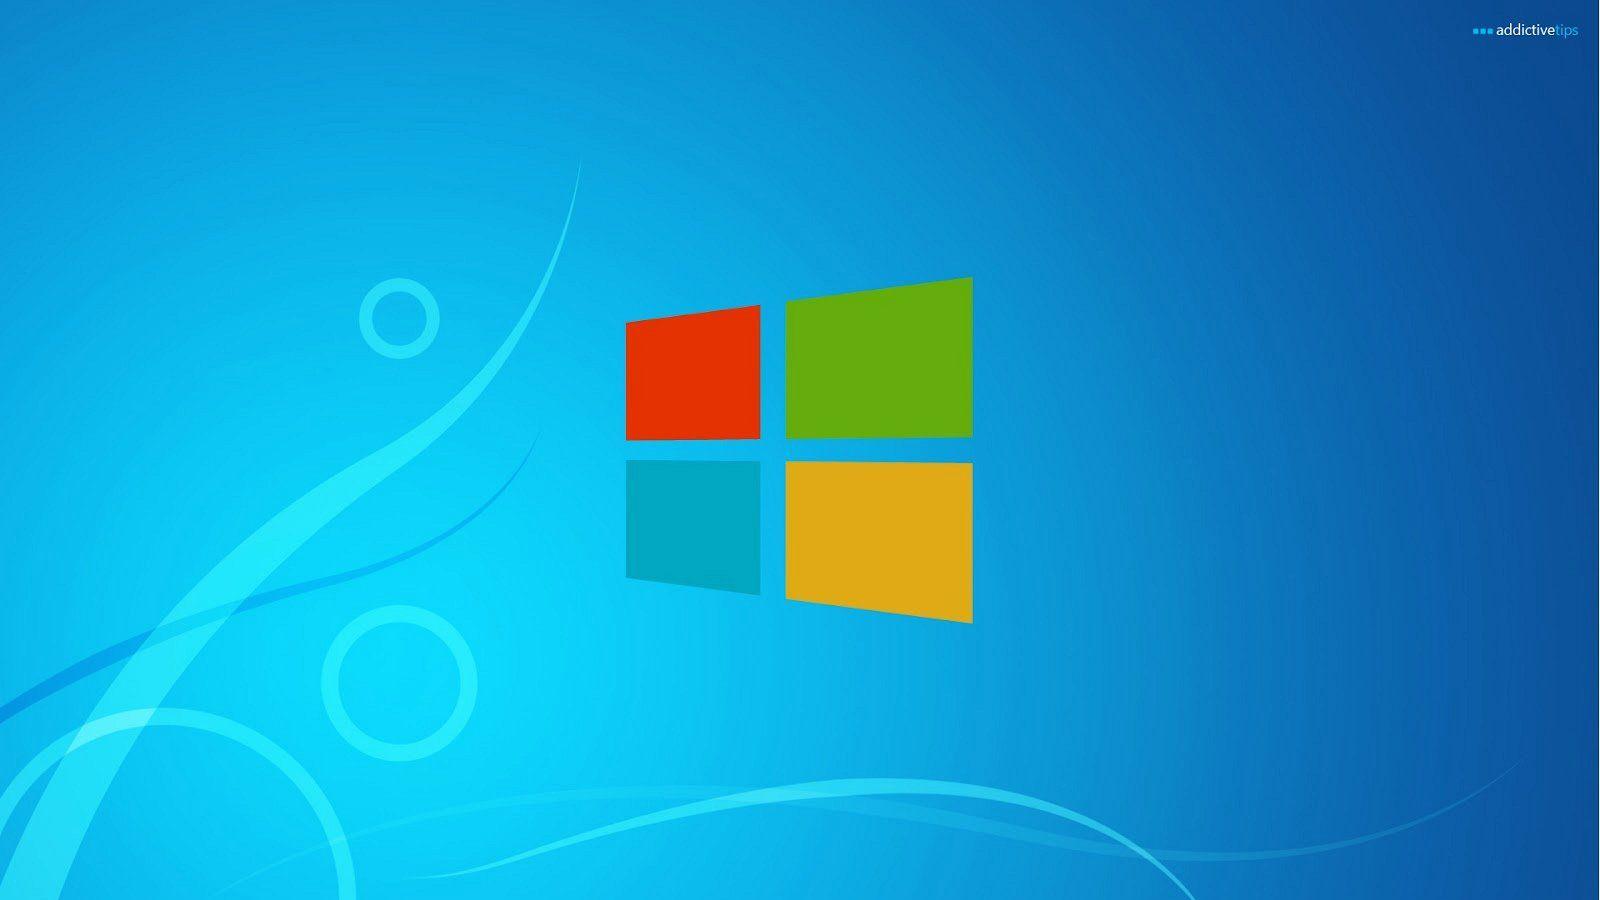 Wallpaper Simple Windows 8 x 900 System Android